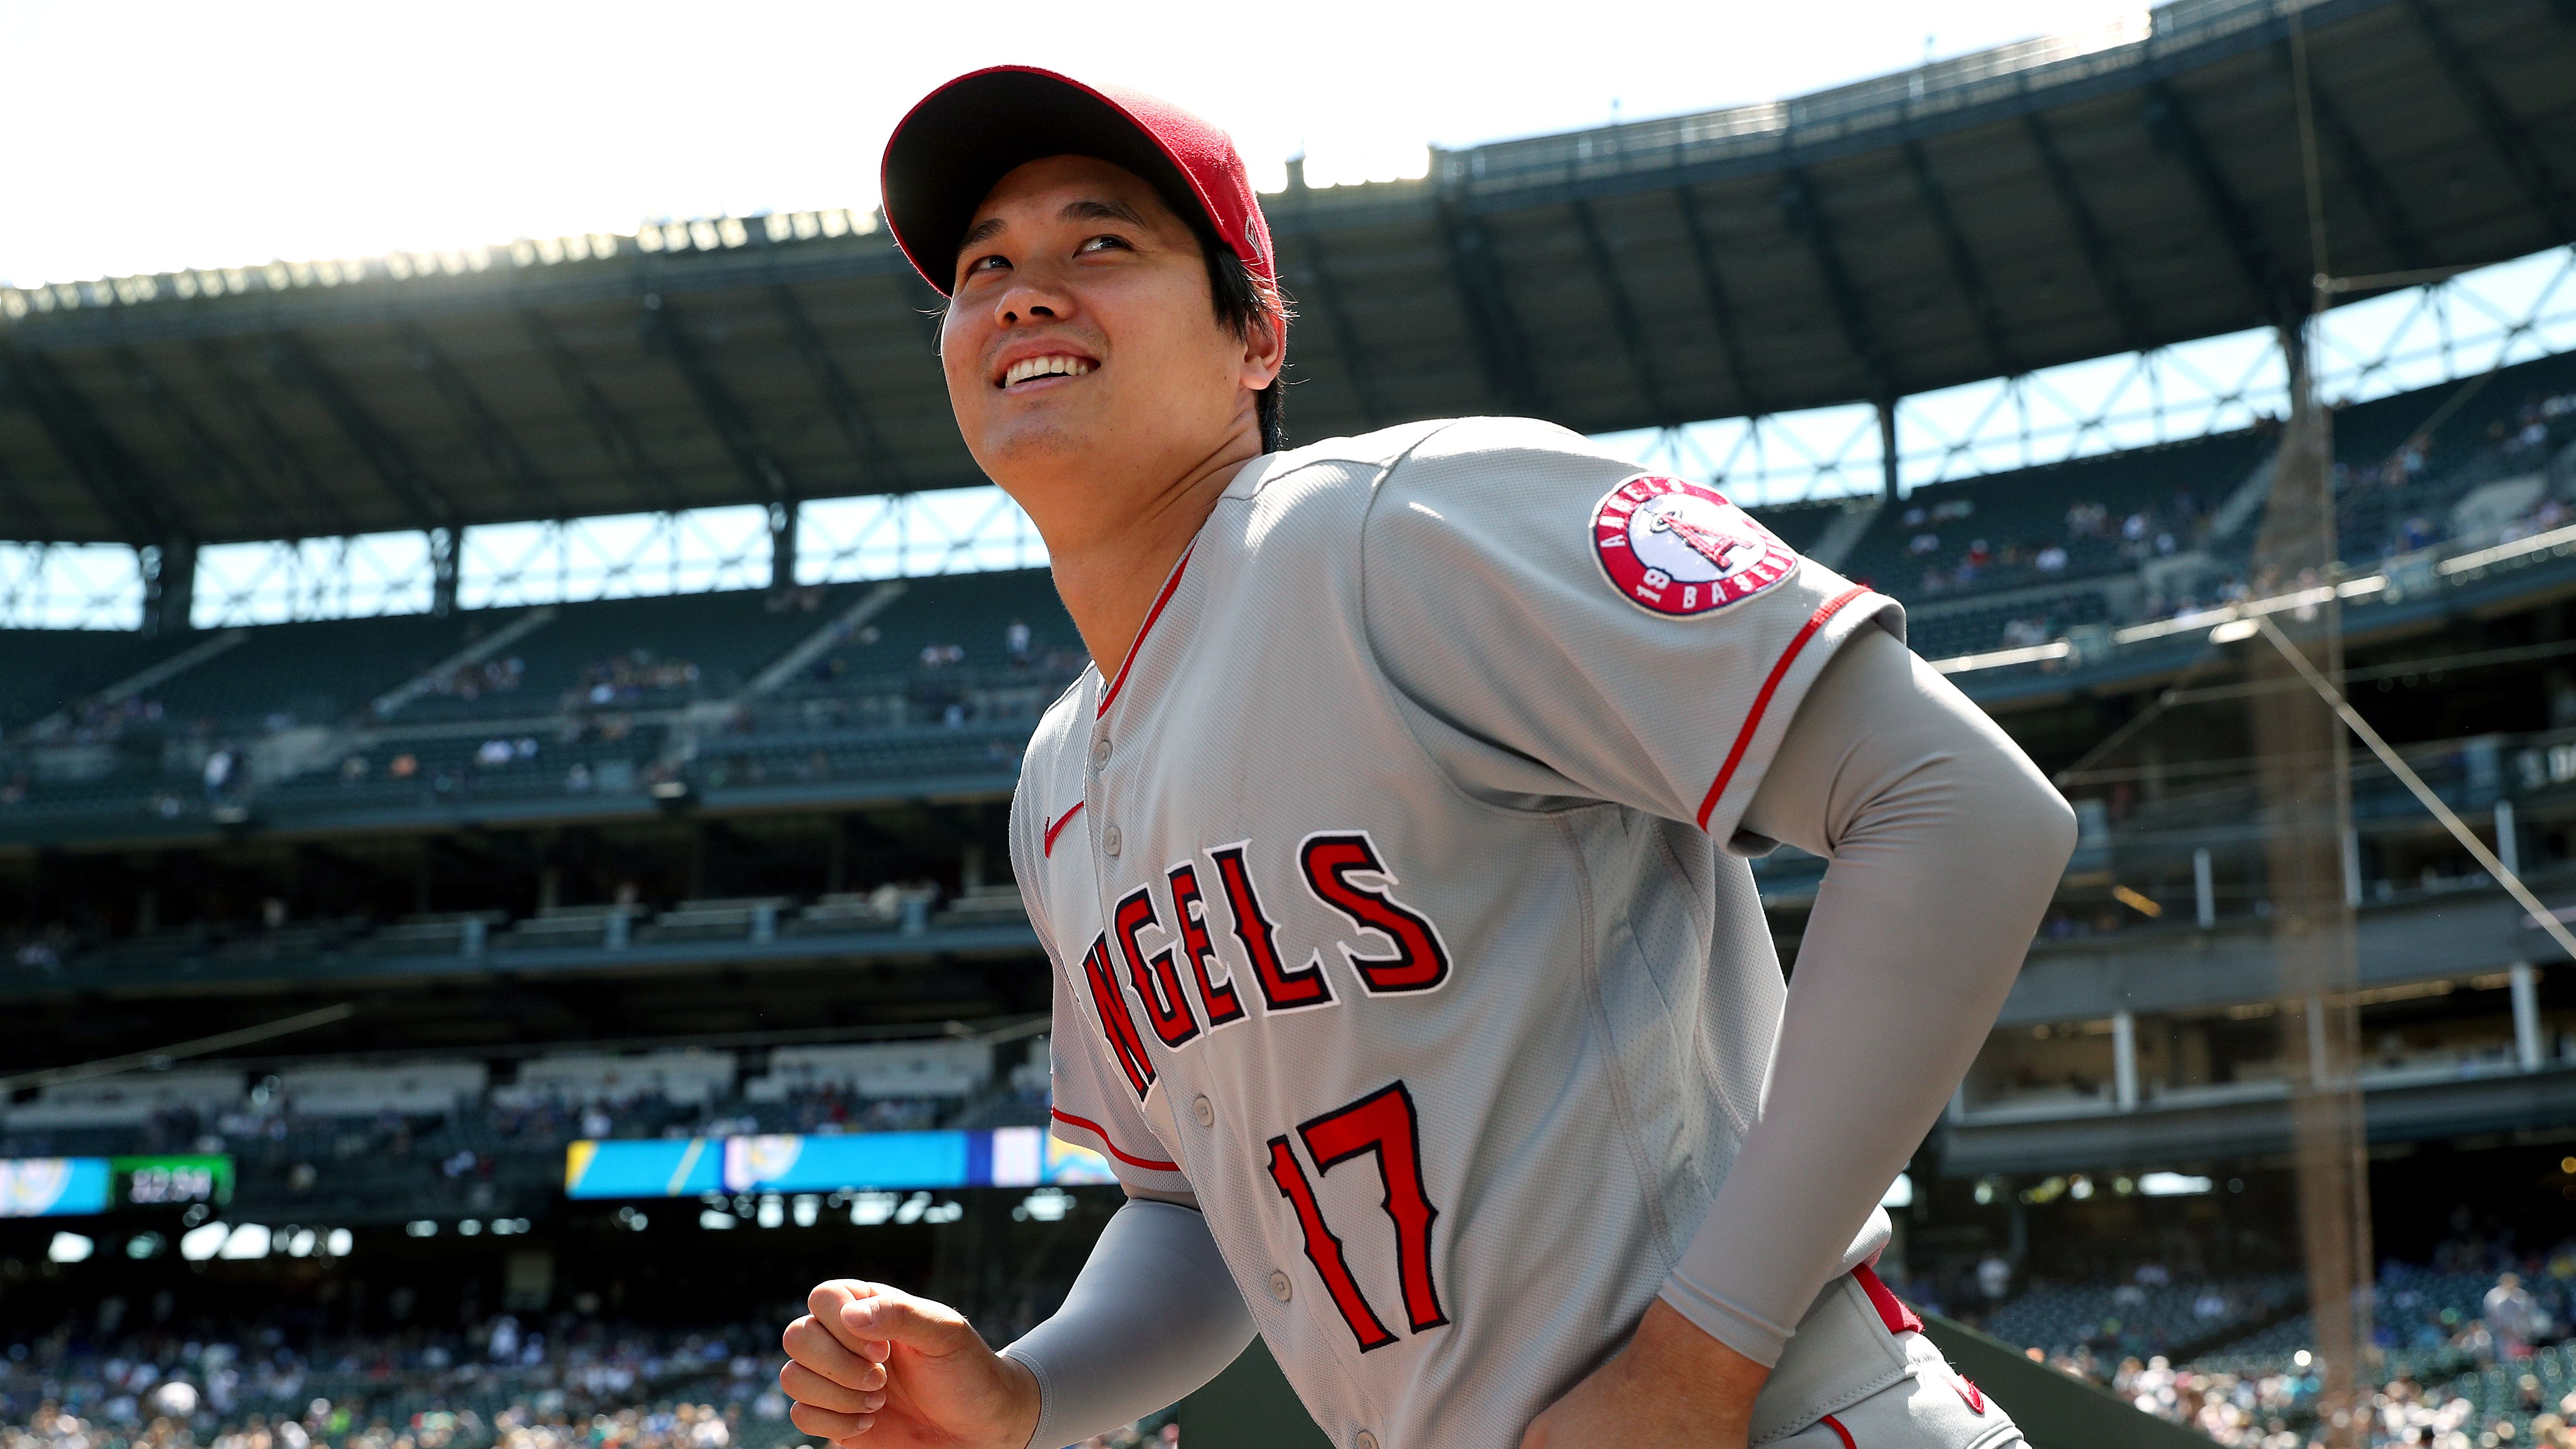 In Photos: Shohei Ohtani spotted sporting unreleased kicks